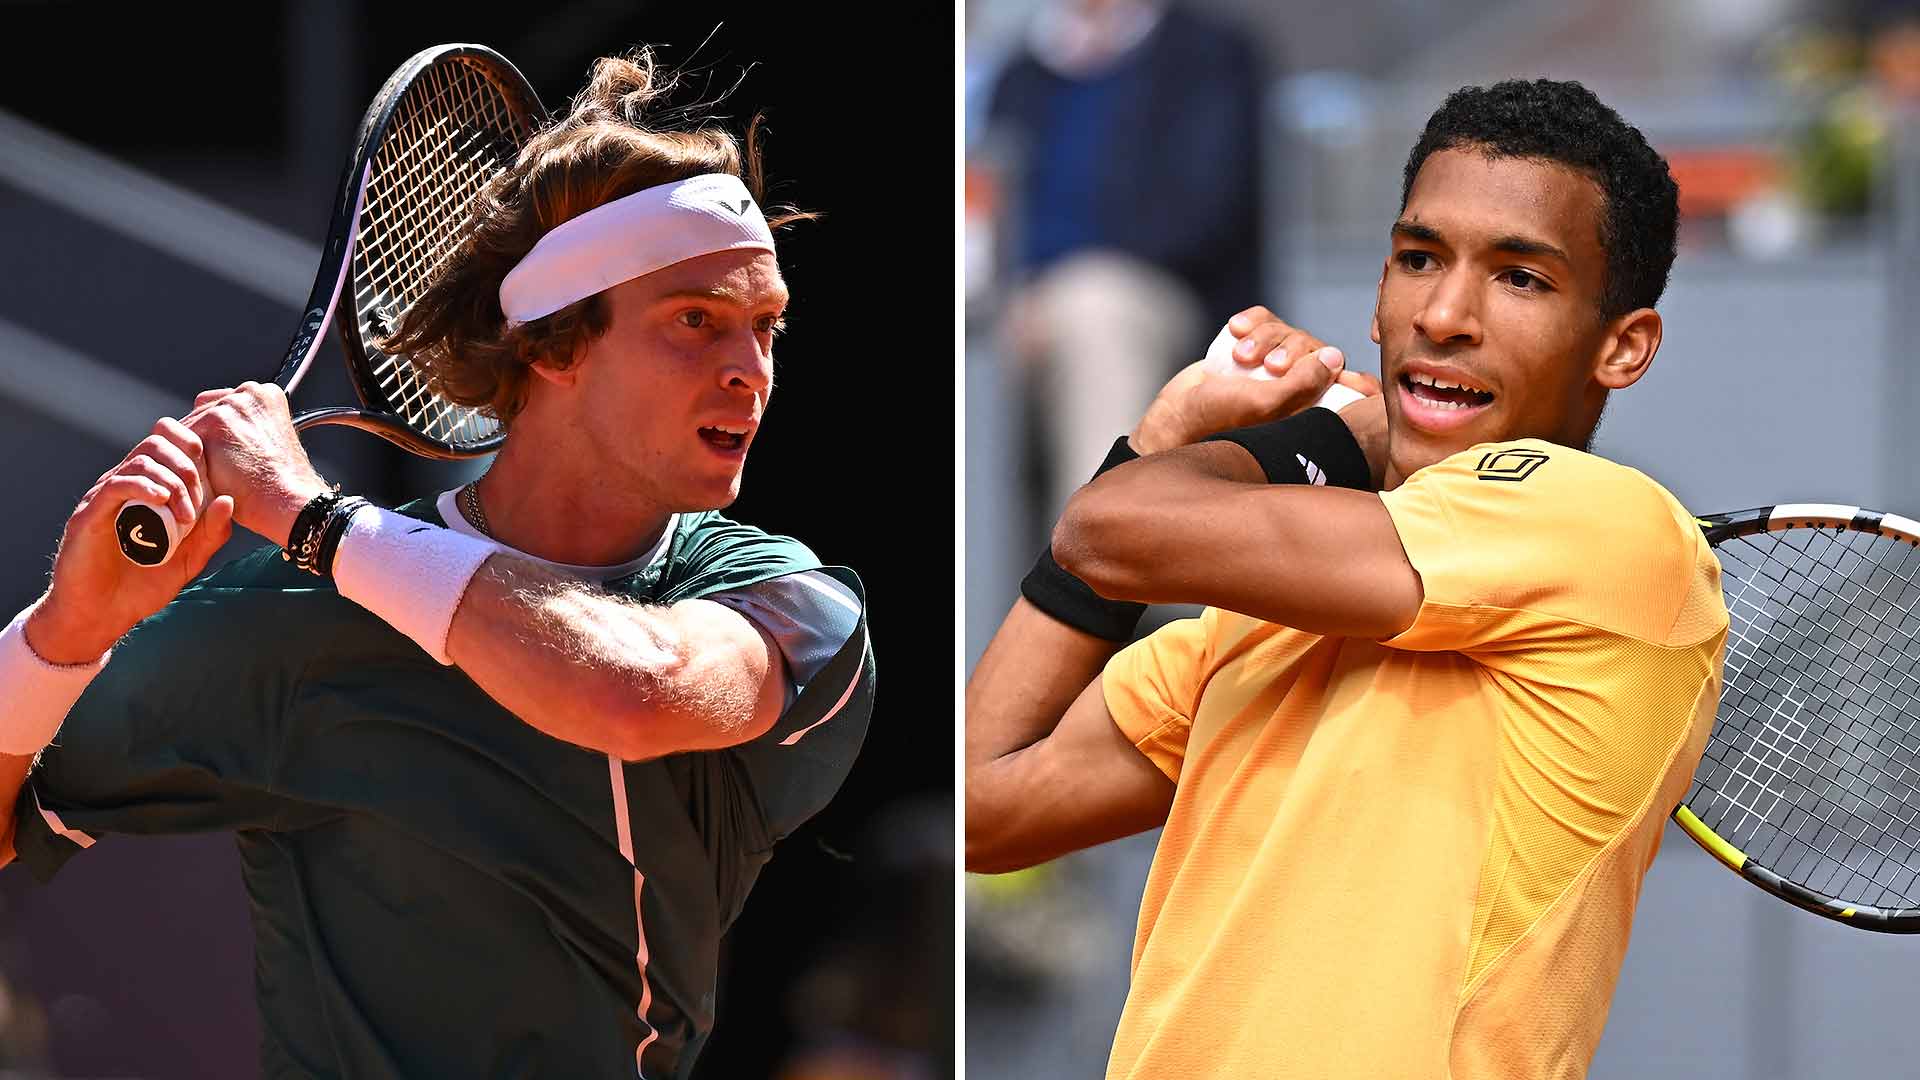 Andrey Rublev leads Felix Auger-Aliassime 4-1 in the pair's Lexus ATP Head2Head series.